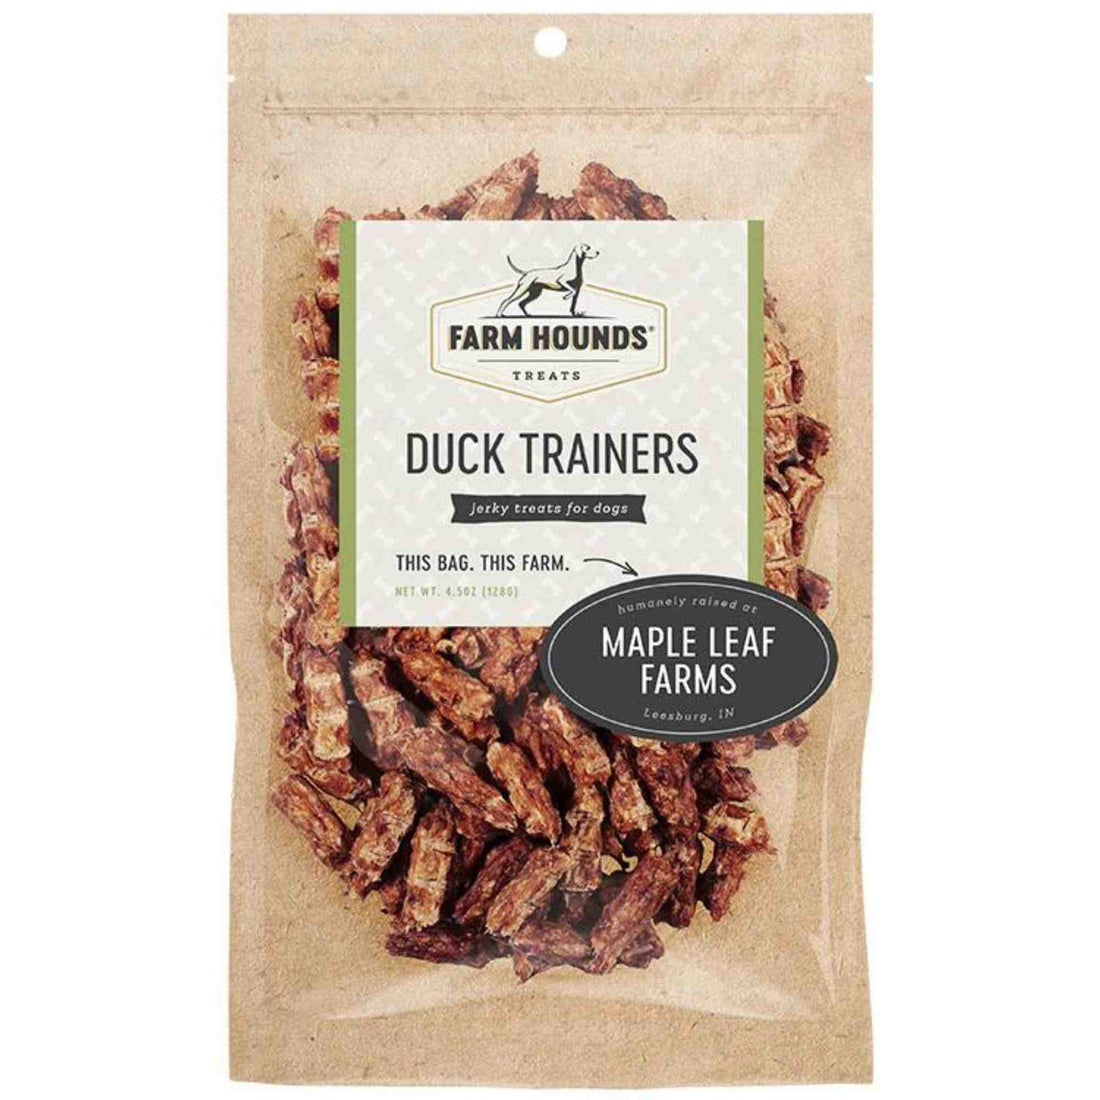 Duck trainers 4.5oz front Dehydrated Dog treat chew maple leaf farms Farm Hounds